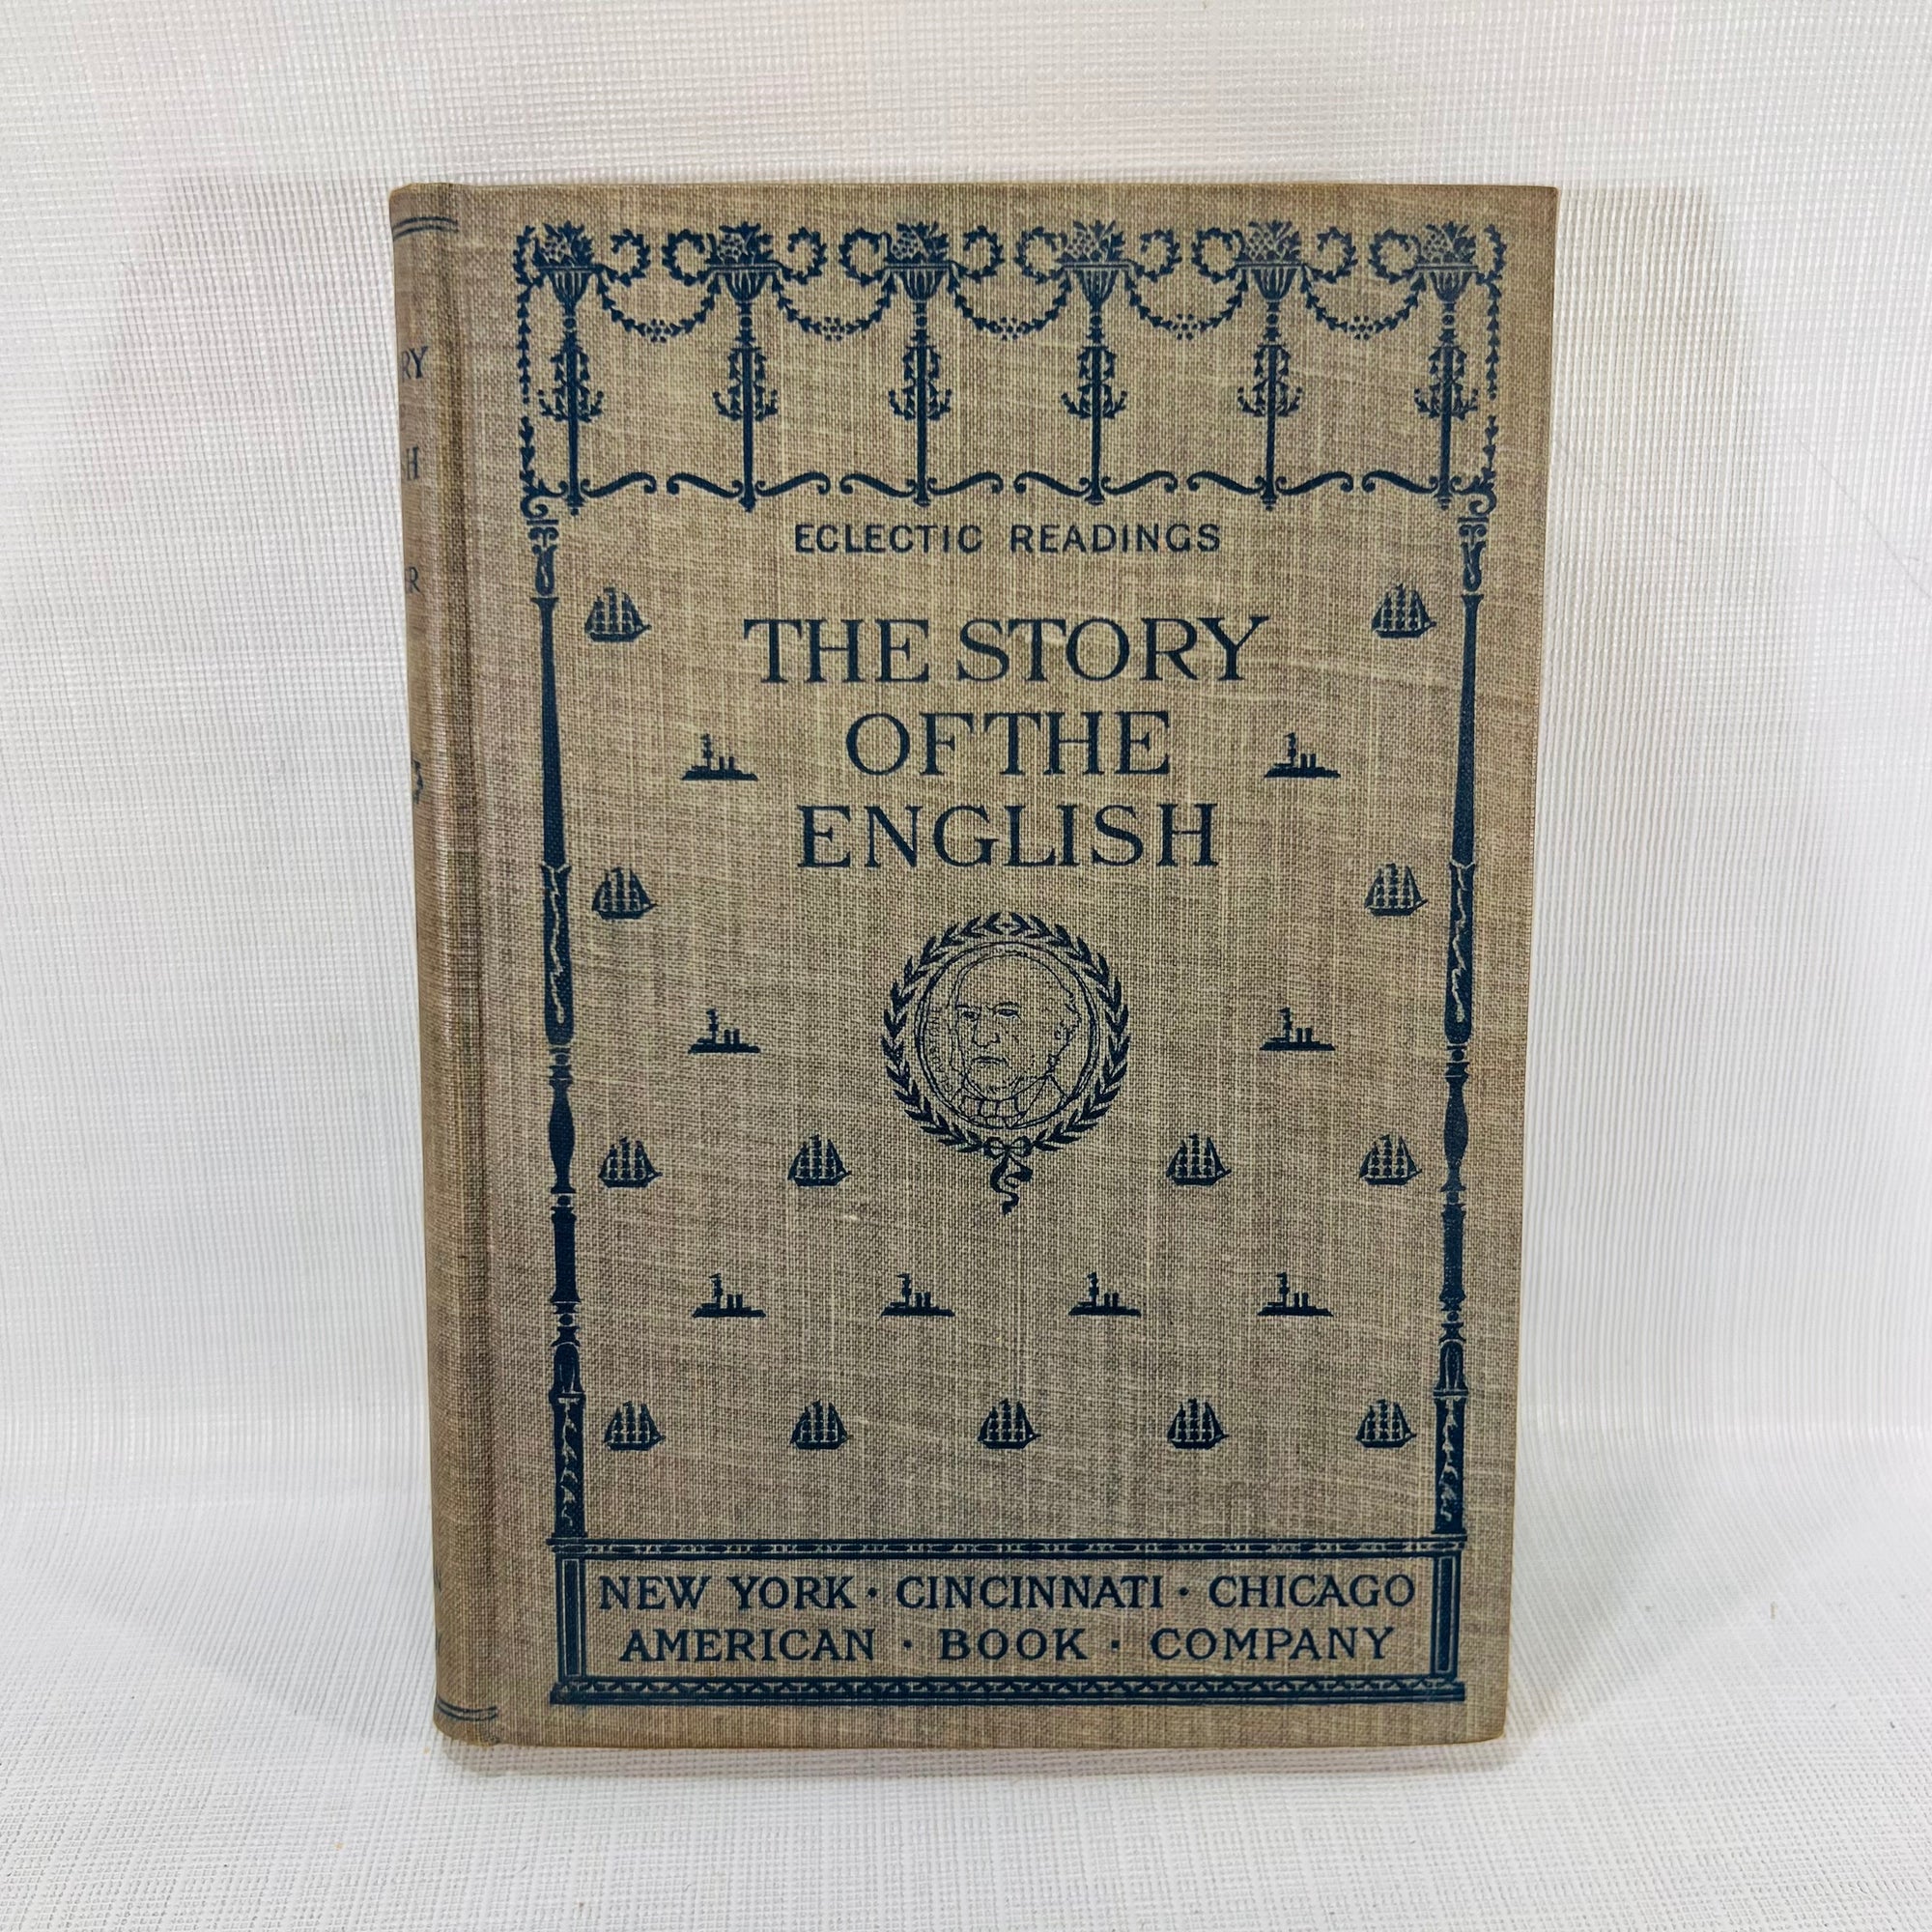 The Story of the English by H.A. Guerber 1898 Eclectic Readings American Book Company